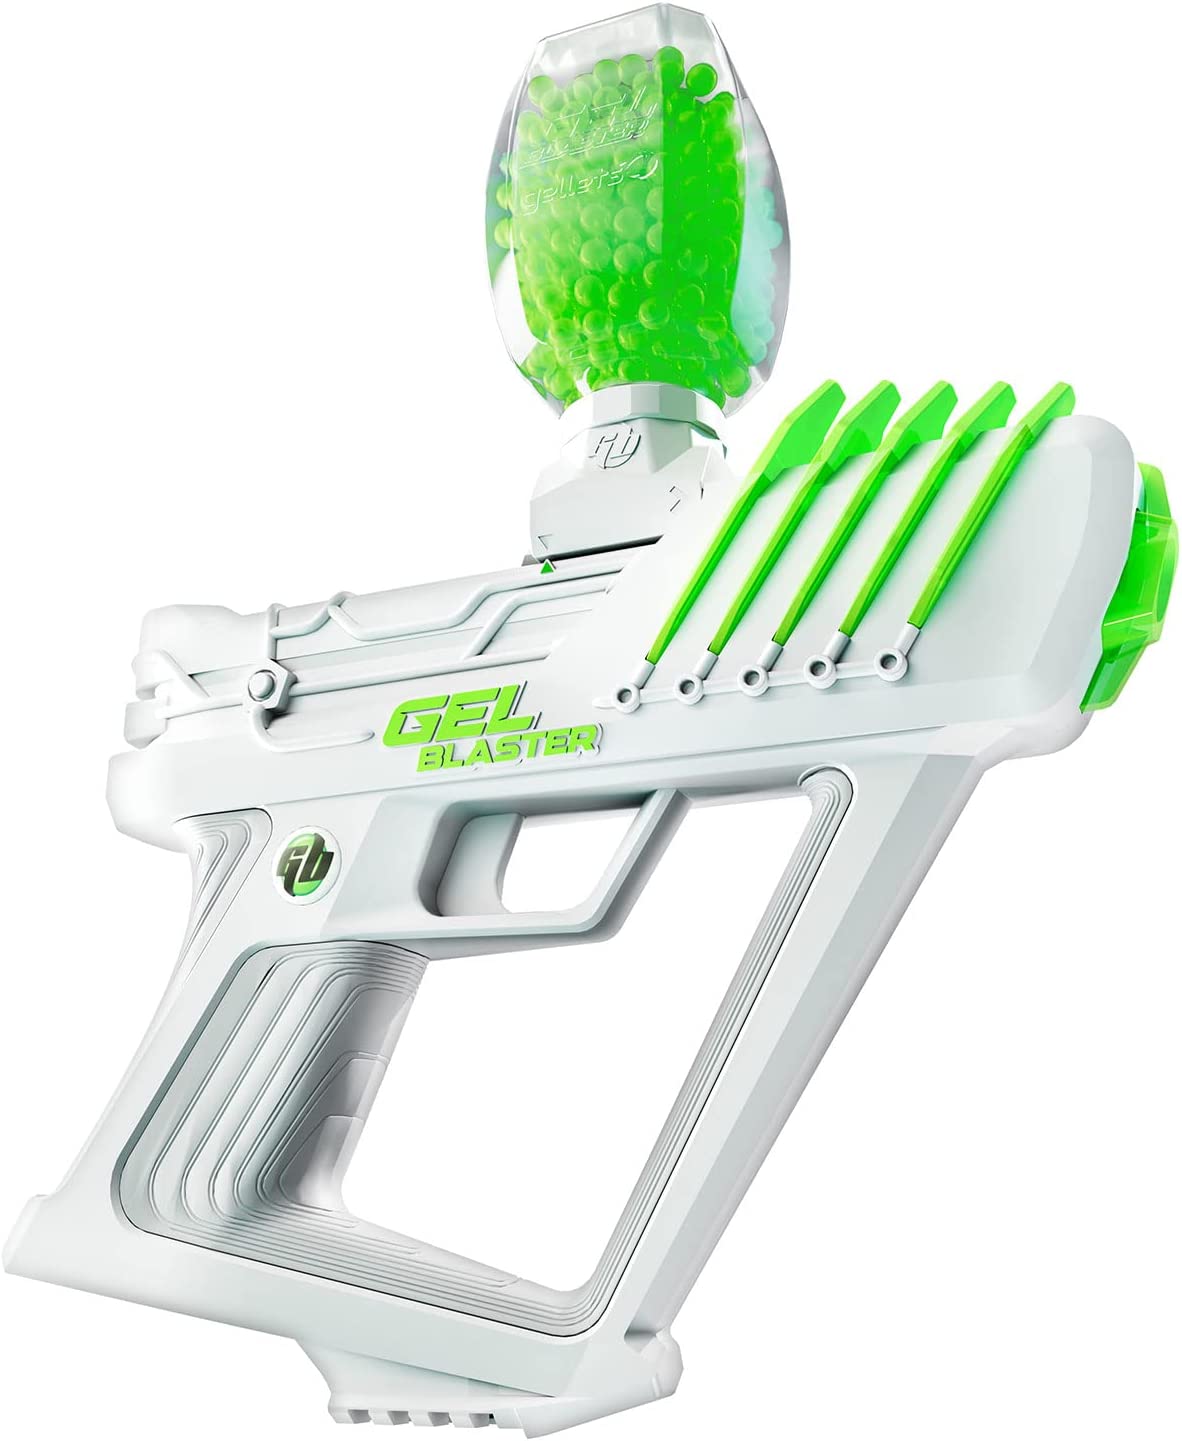  XShot Hyper Gel Trace Fire Blaster, Semi and Fully Automatic  Gel Blaster & 10,000 Gellets, 600 Capacity Hopper & 850 Capacity Mag, Ages  14 & Up by ZURU : Toys & Games